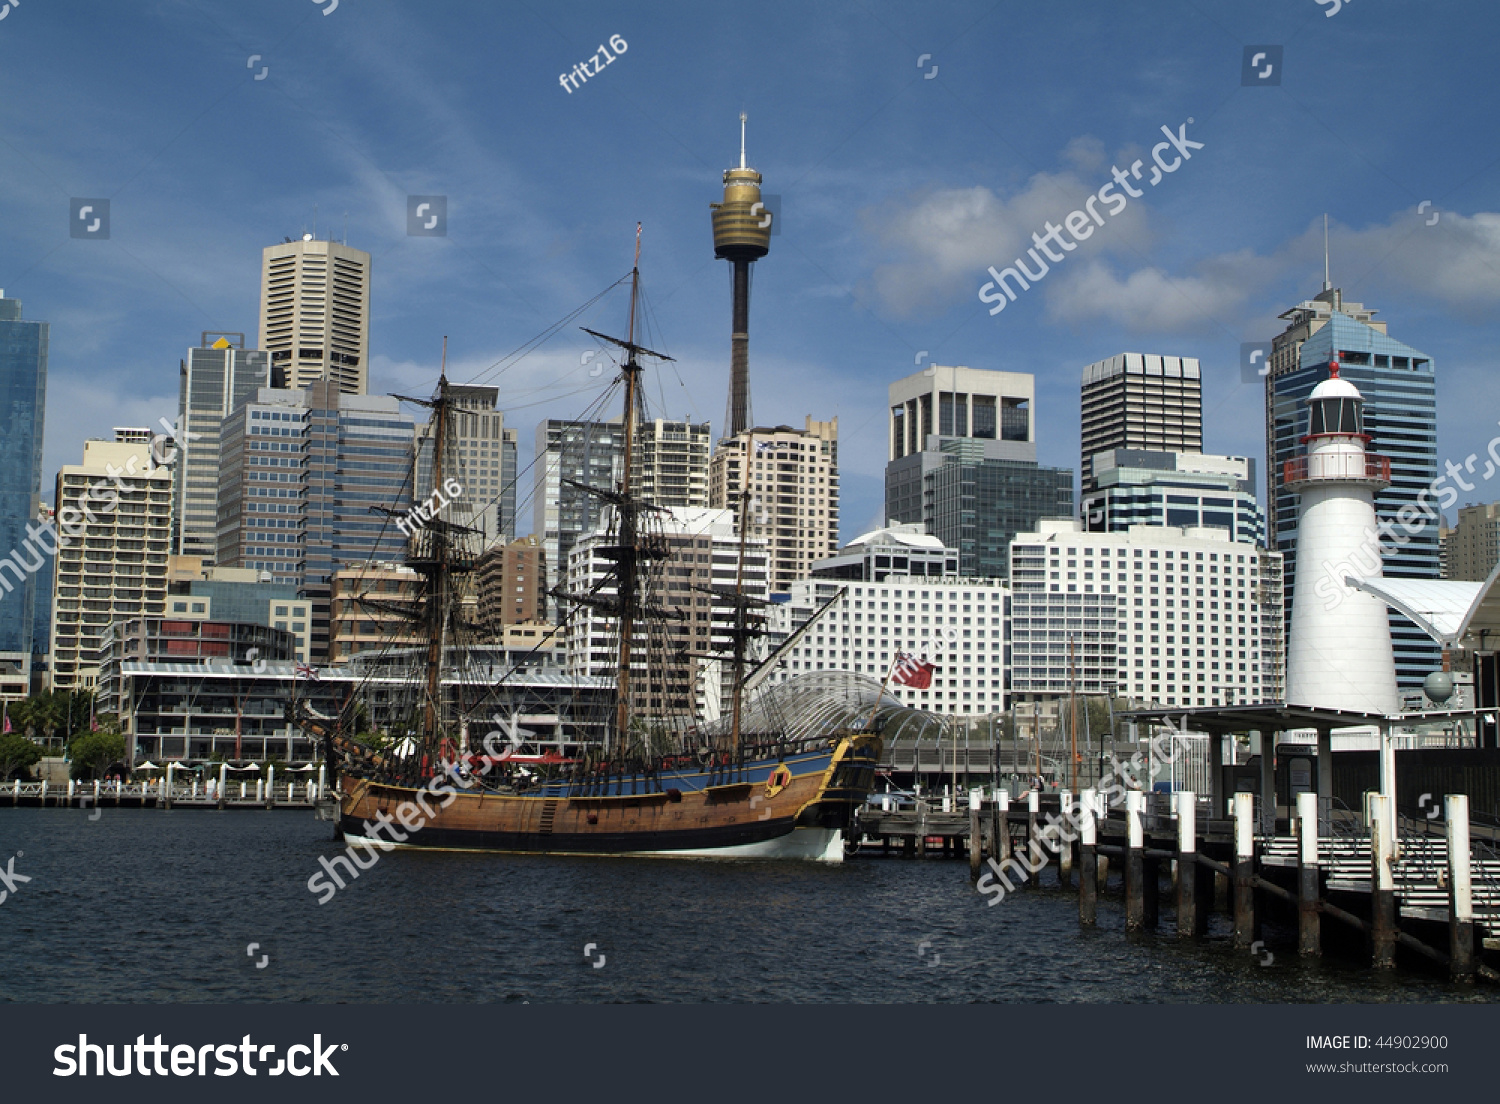 HMB Endeavour in Darling Harbour and skyline from Sydney #44902900